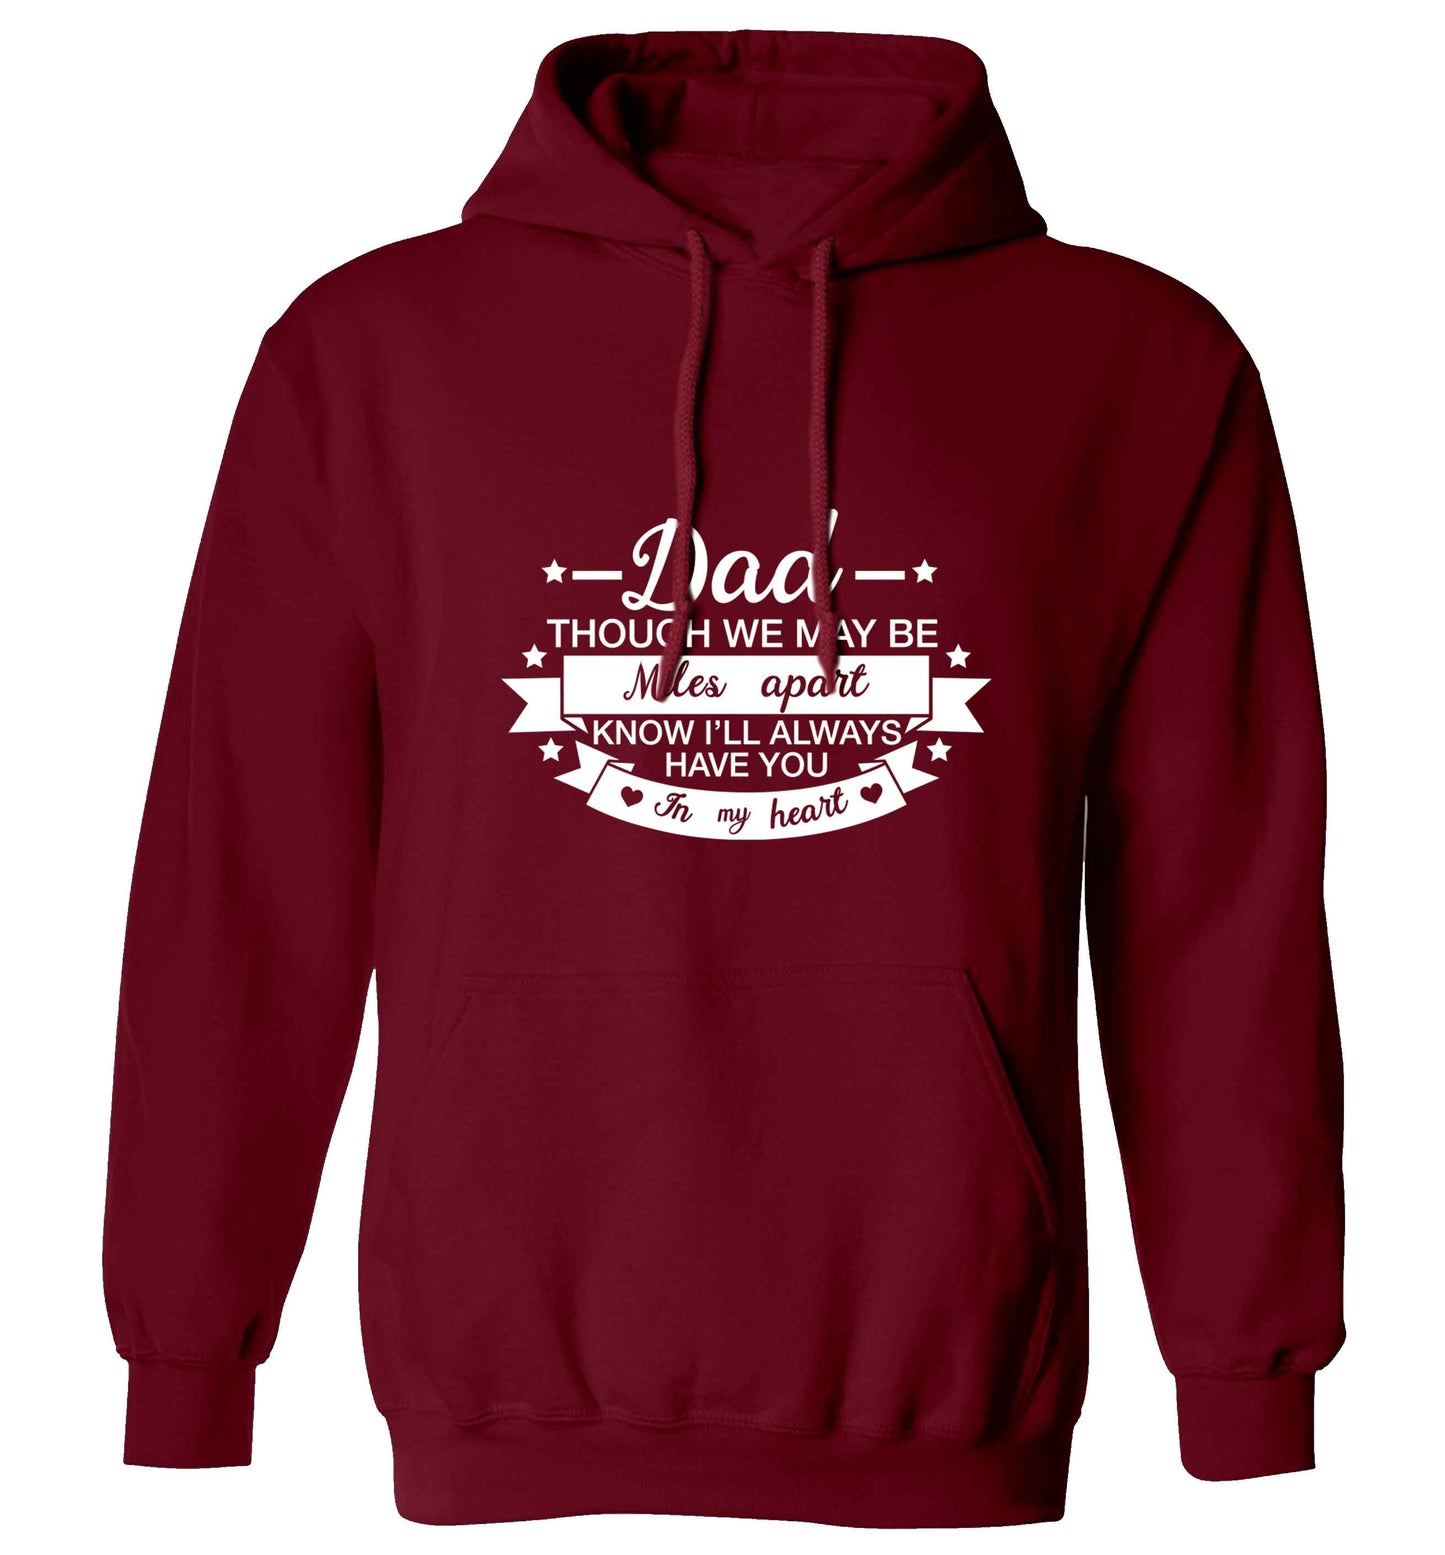 Dad though we are miles apart know I'll always have you in my heart adults unisex maroon hoodie 2XL